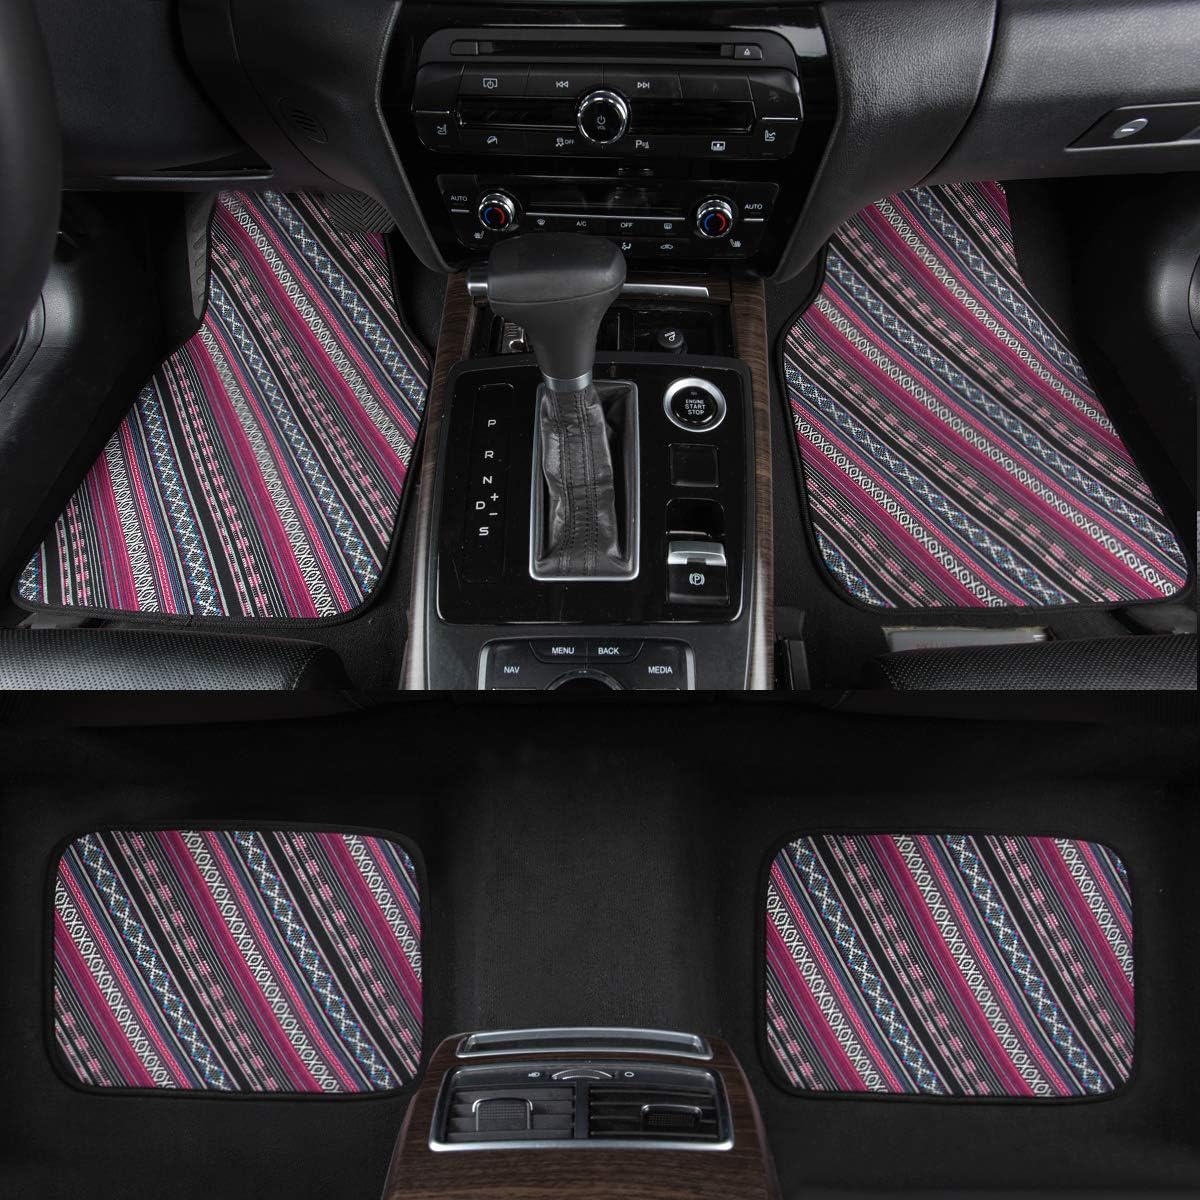 CAR PASS Ethnic Boho Bundle Car Floor Mats with Car Seat Covers Two Front Seat Only, Universal Fit for Convertible Coupe Hatchback Pickup Sedan SUV Wagon Truck -